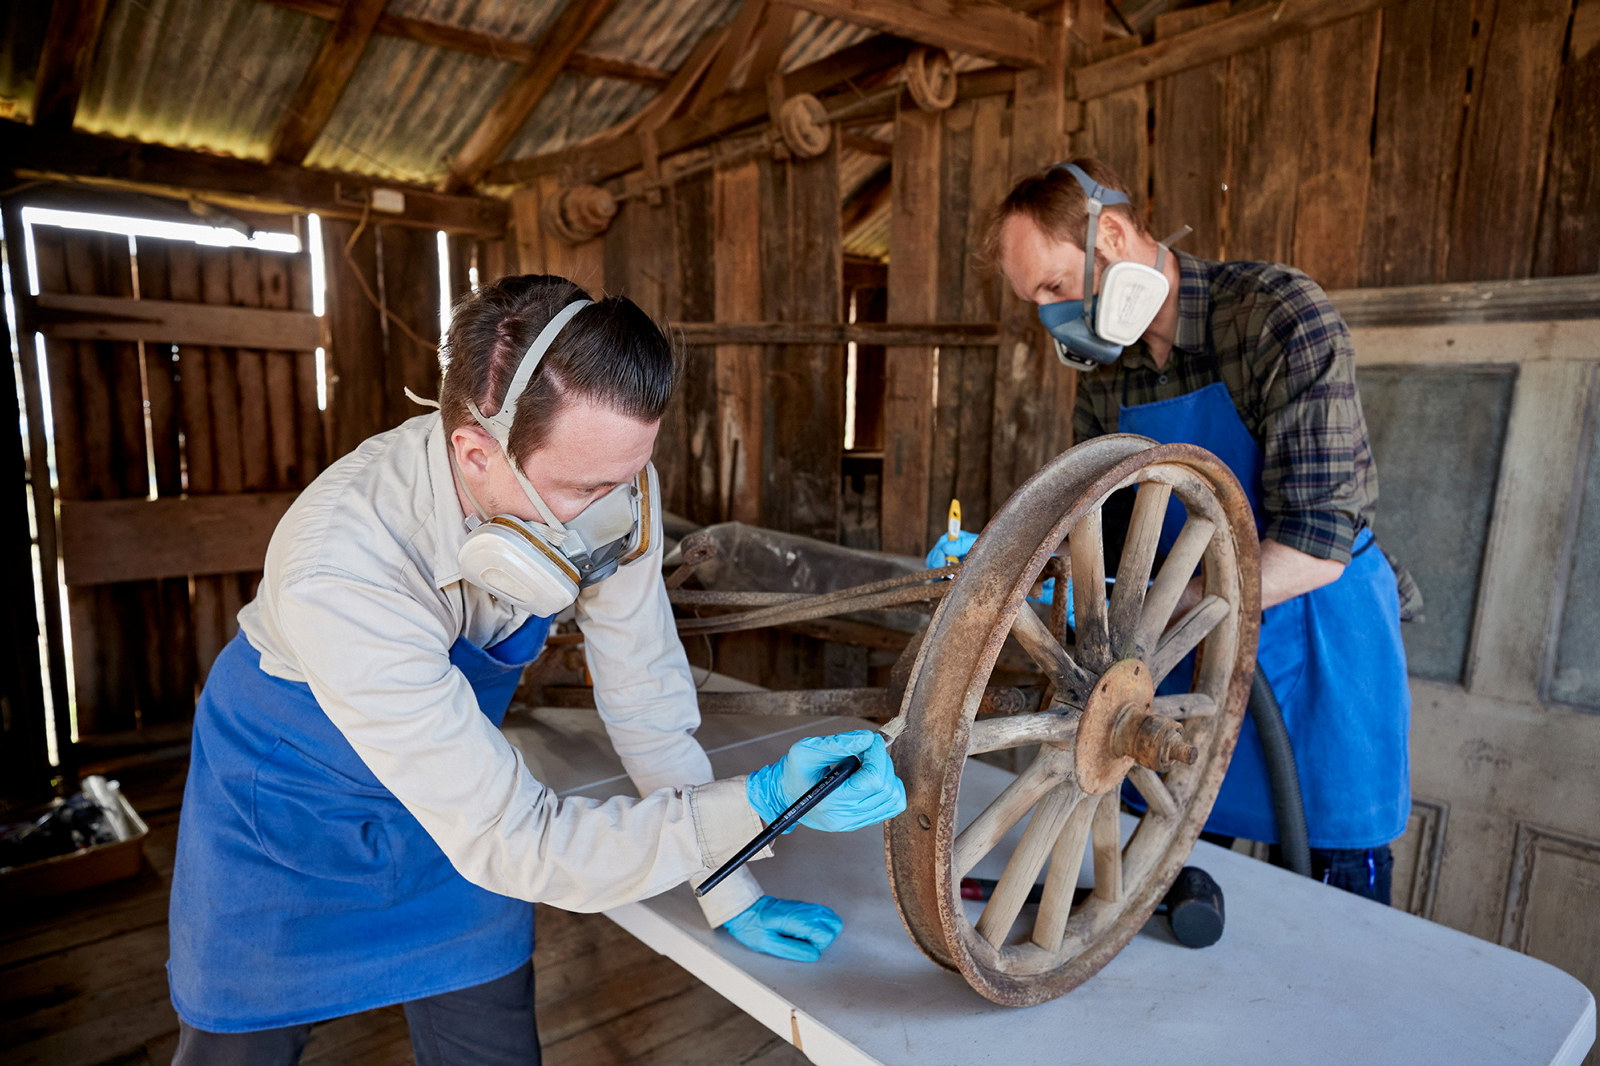 Two men wearing blue aprons and masks working on object inside wooden shed.